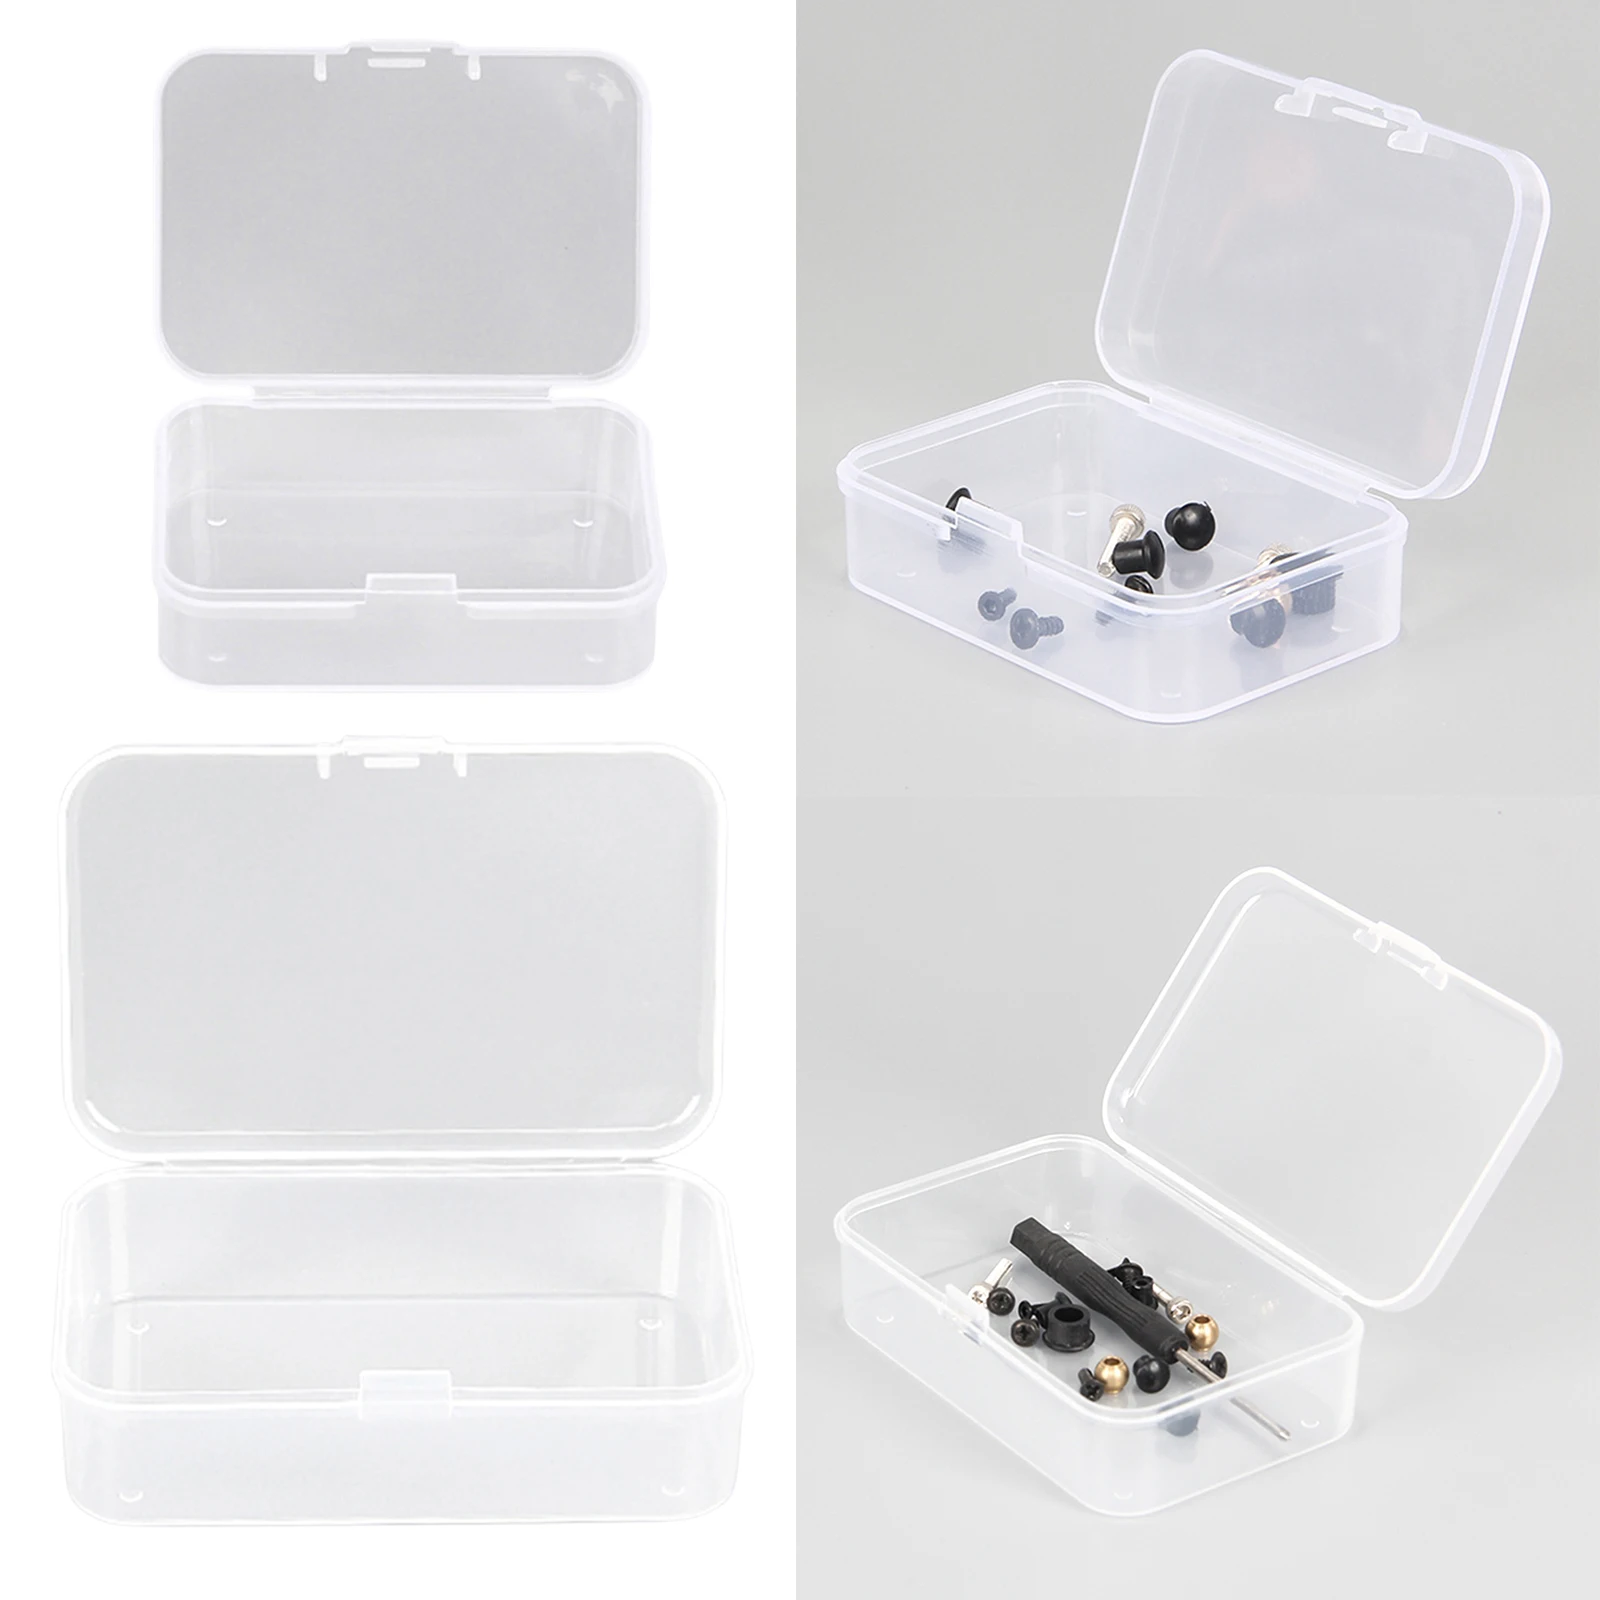 Storage Case Box Multi-functional Organizers and Storage Case for Hardware, Screws, Bolts, Nuts, Nails, Tools, Arts,